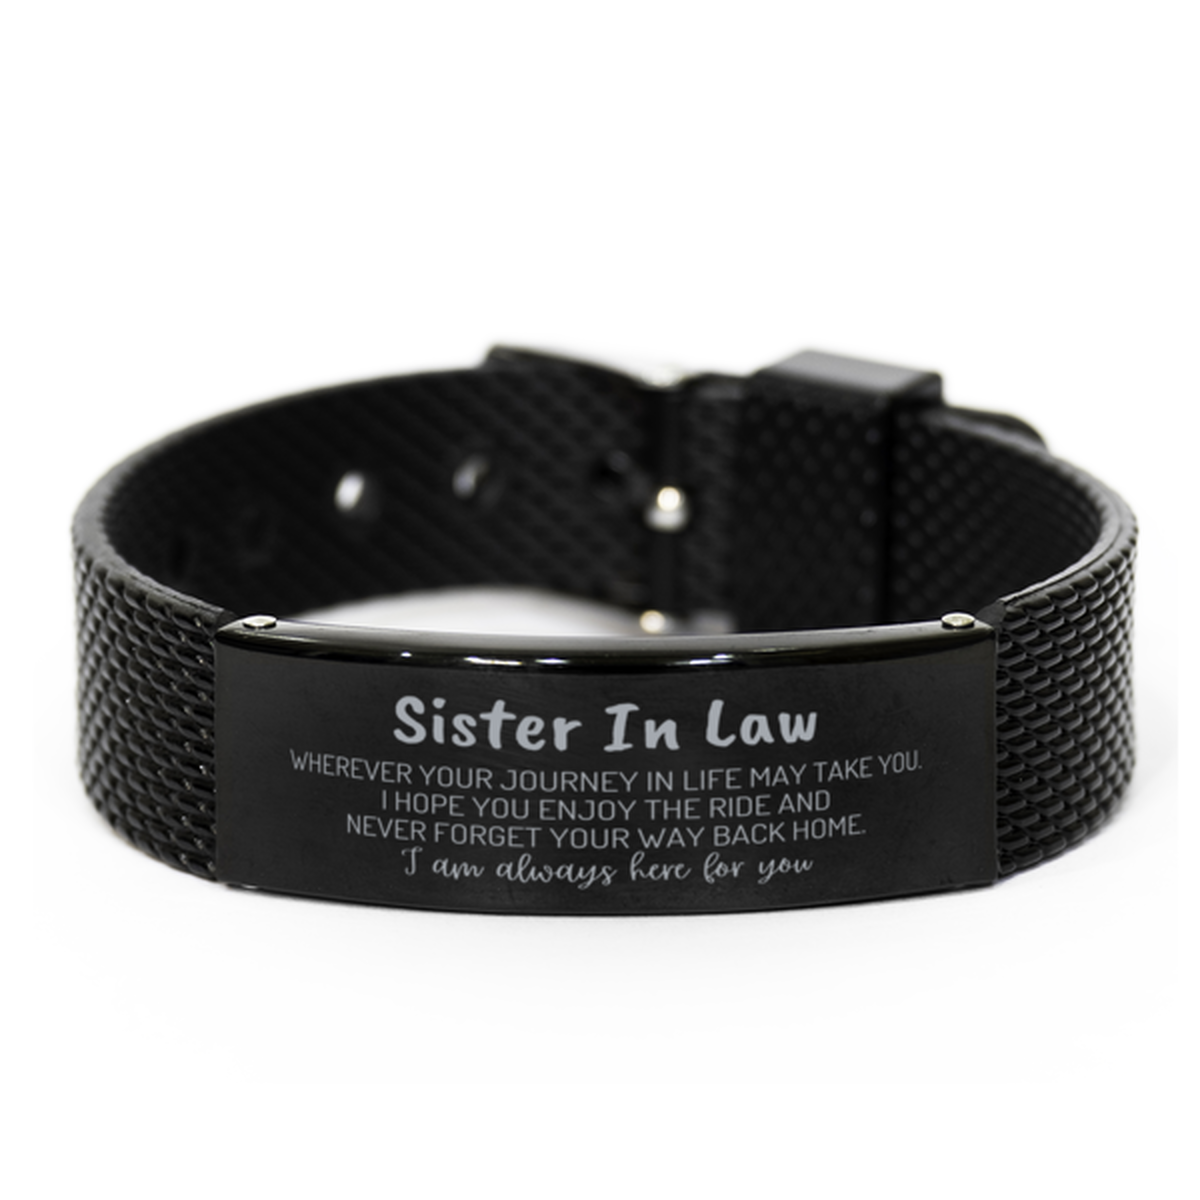 Sister In Law wherever your journey in life may take you, I am always here for you Sister In Law Black Shark Mesh Bracelet, Awesome Christmas Gifts For Sister In Law, Sister In Law Birthday Gifts for Men Women Family Loved One